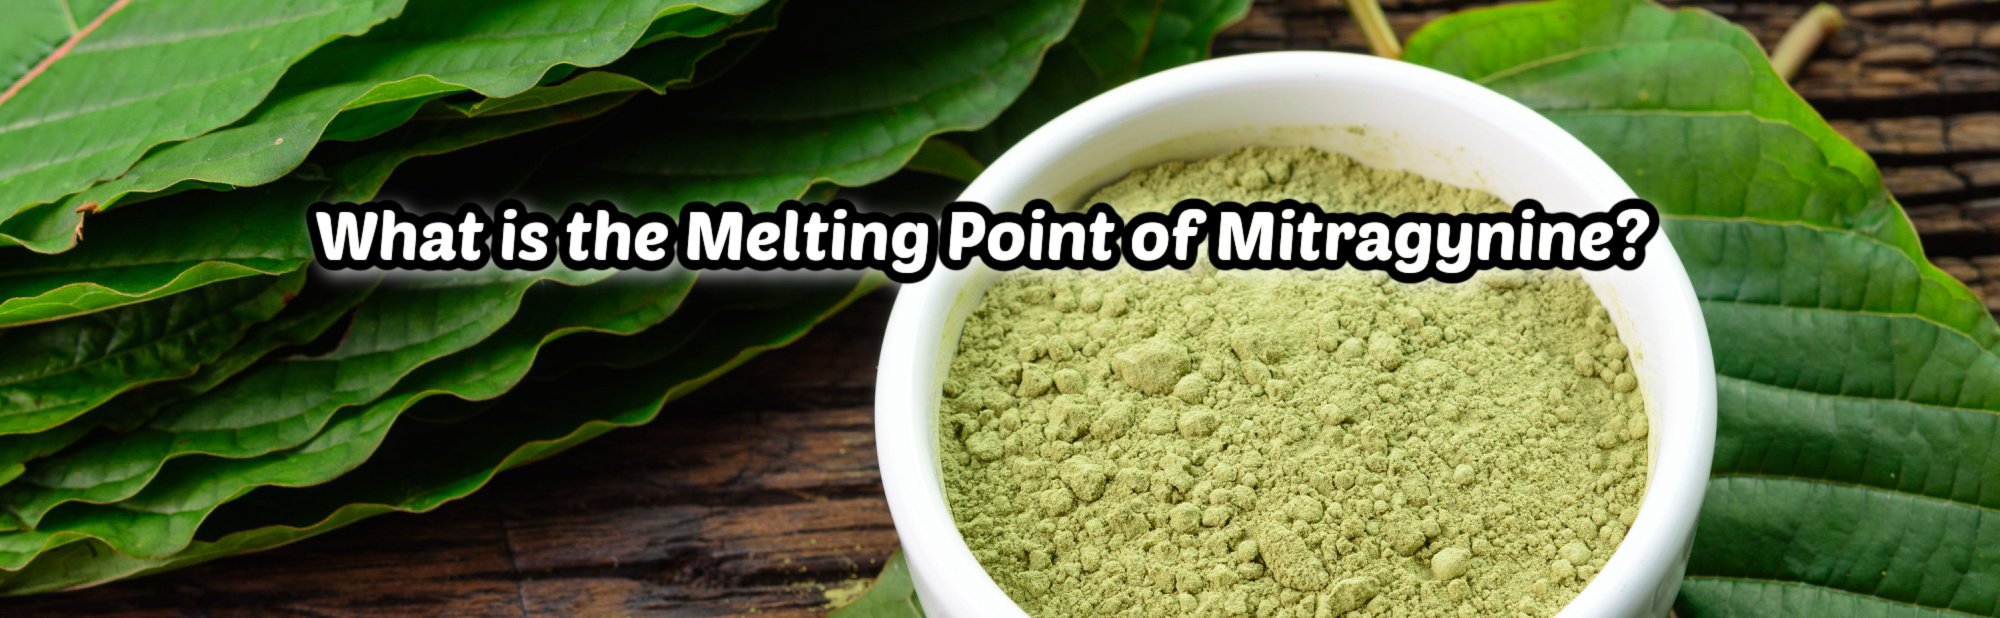 image of what is the melting point of mitragynine